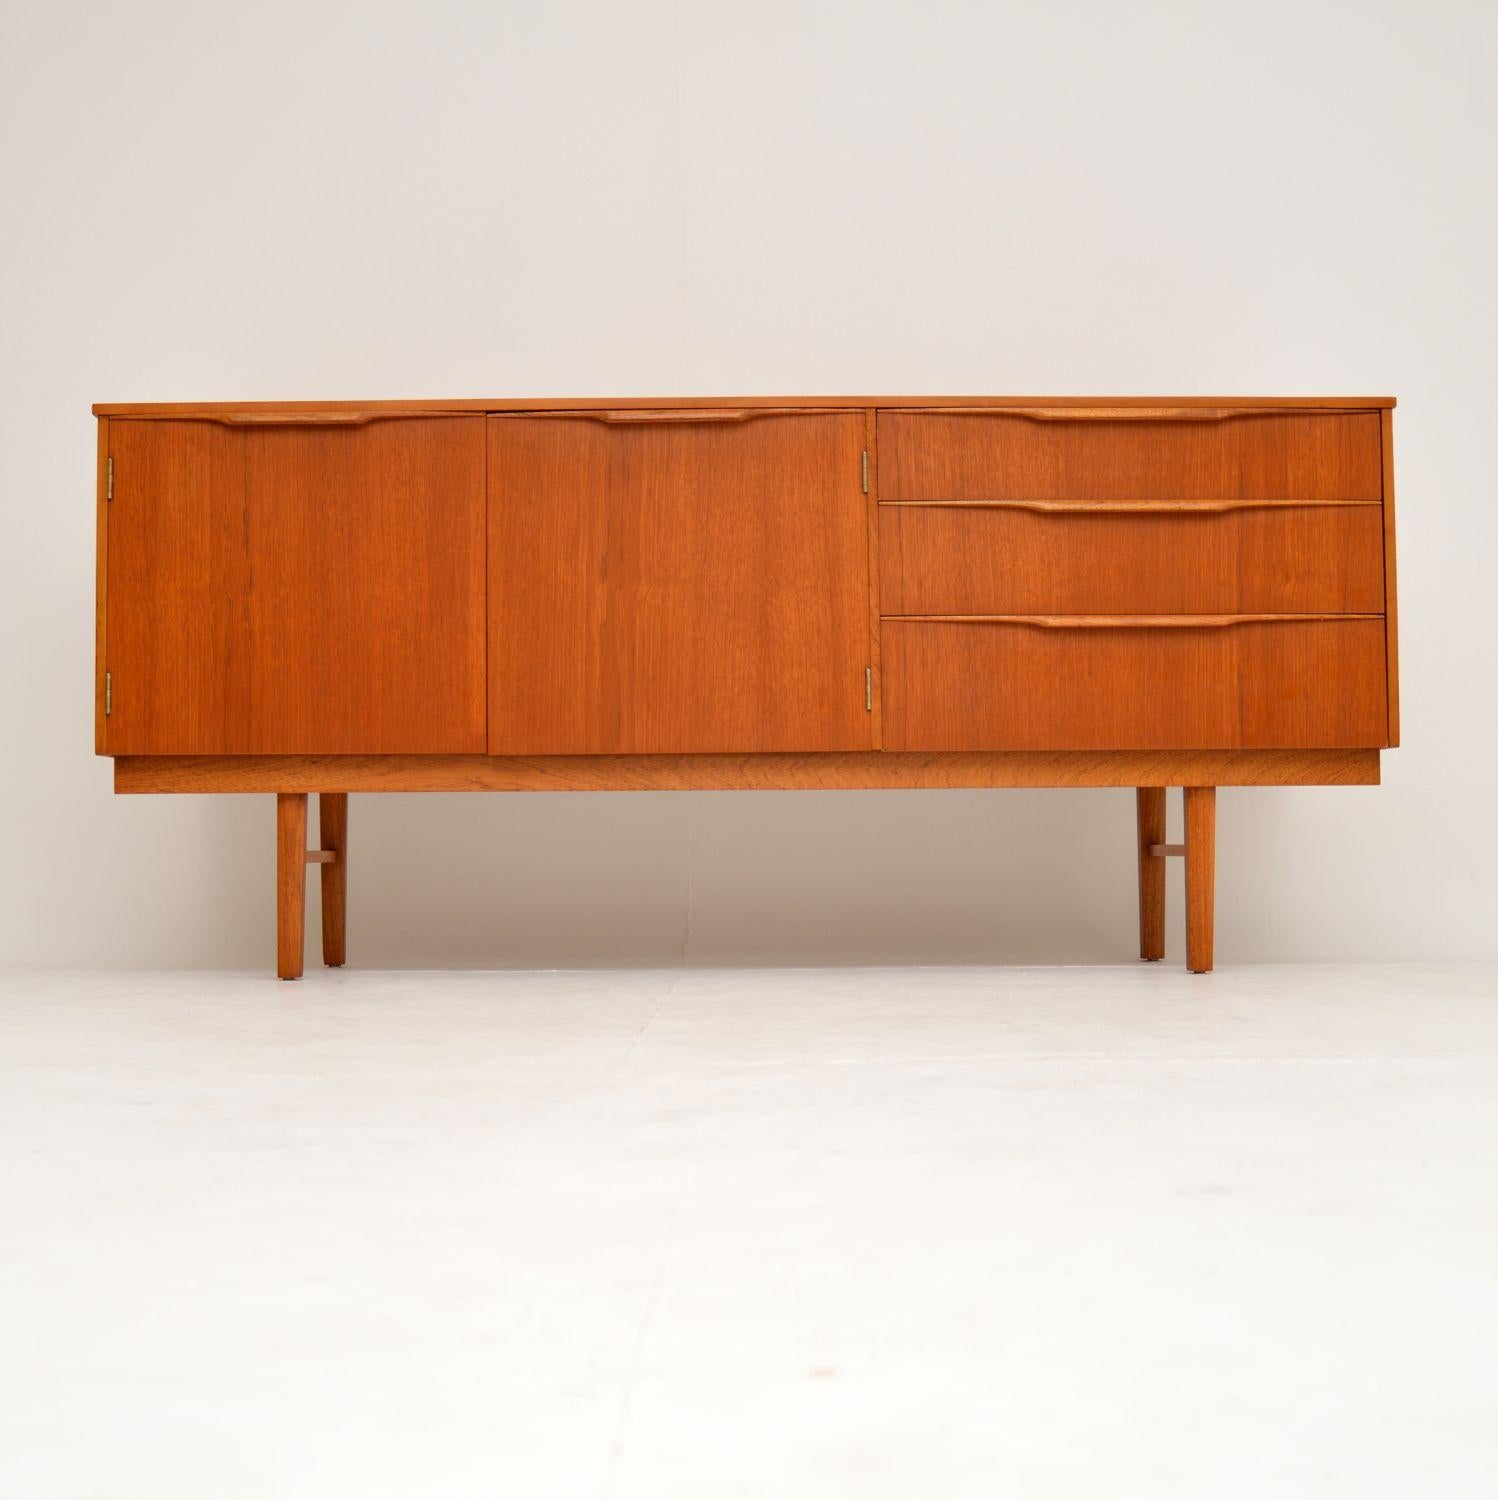 A smart, stylish and very well made vintage teak sideboard. This dates from the 1960s, and it’s in superb condition throughout. We have had it stripped and re-polished to a very high standard, it has a gorgeous color and lovely grain